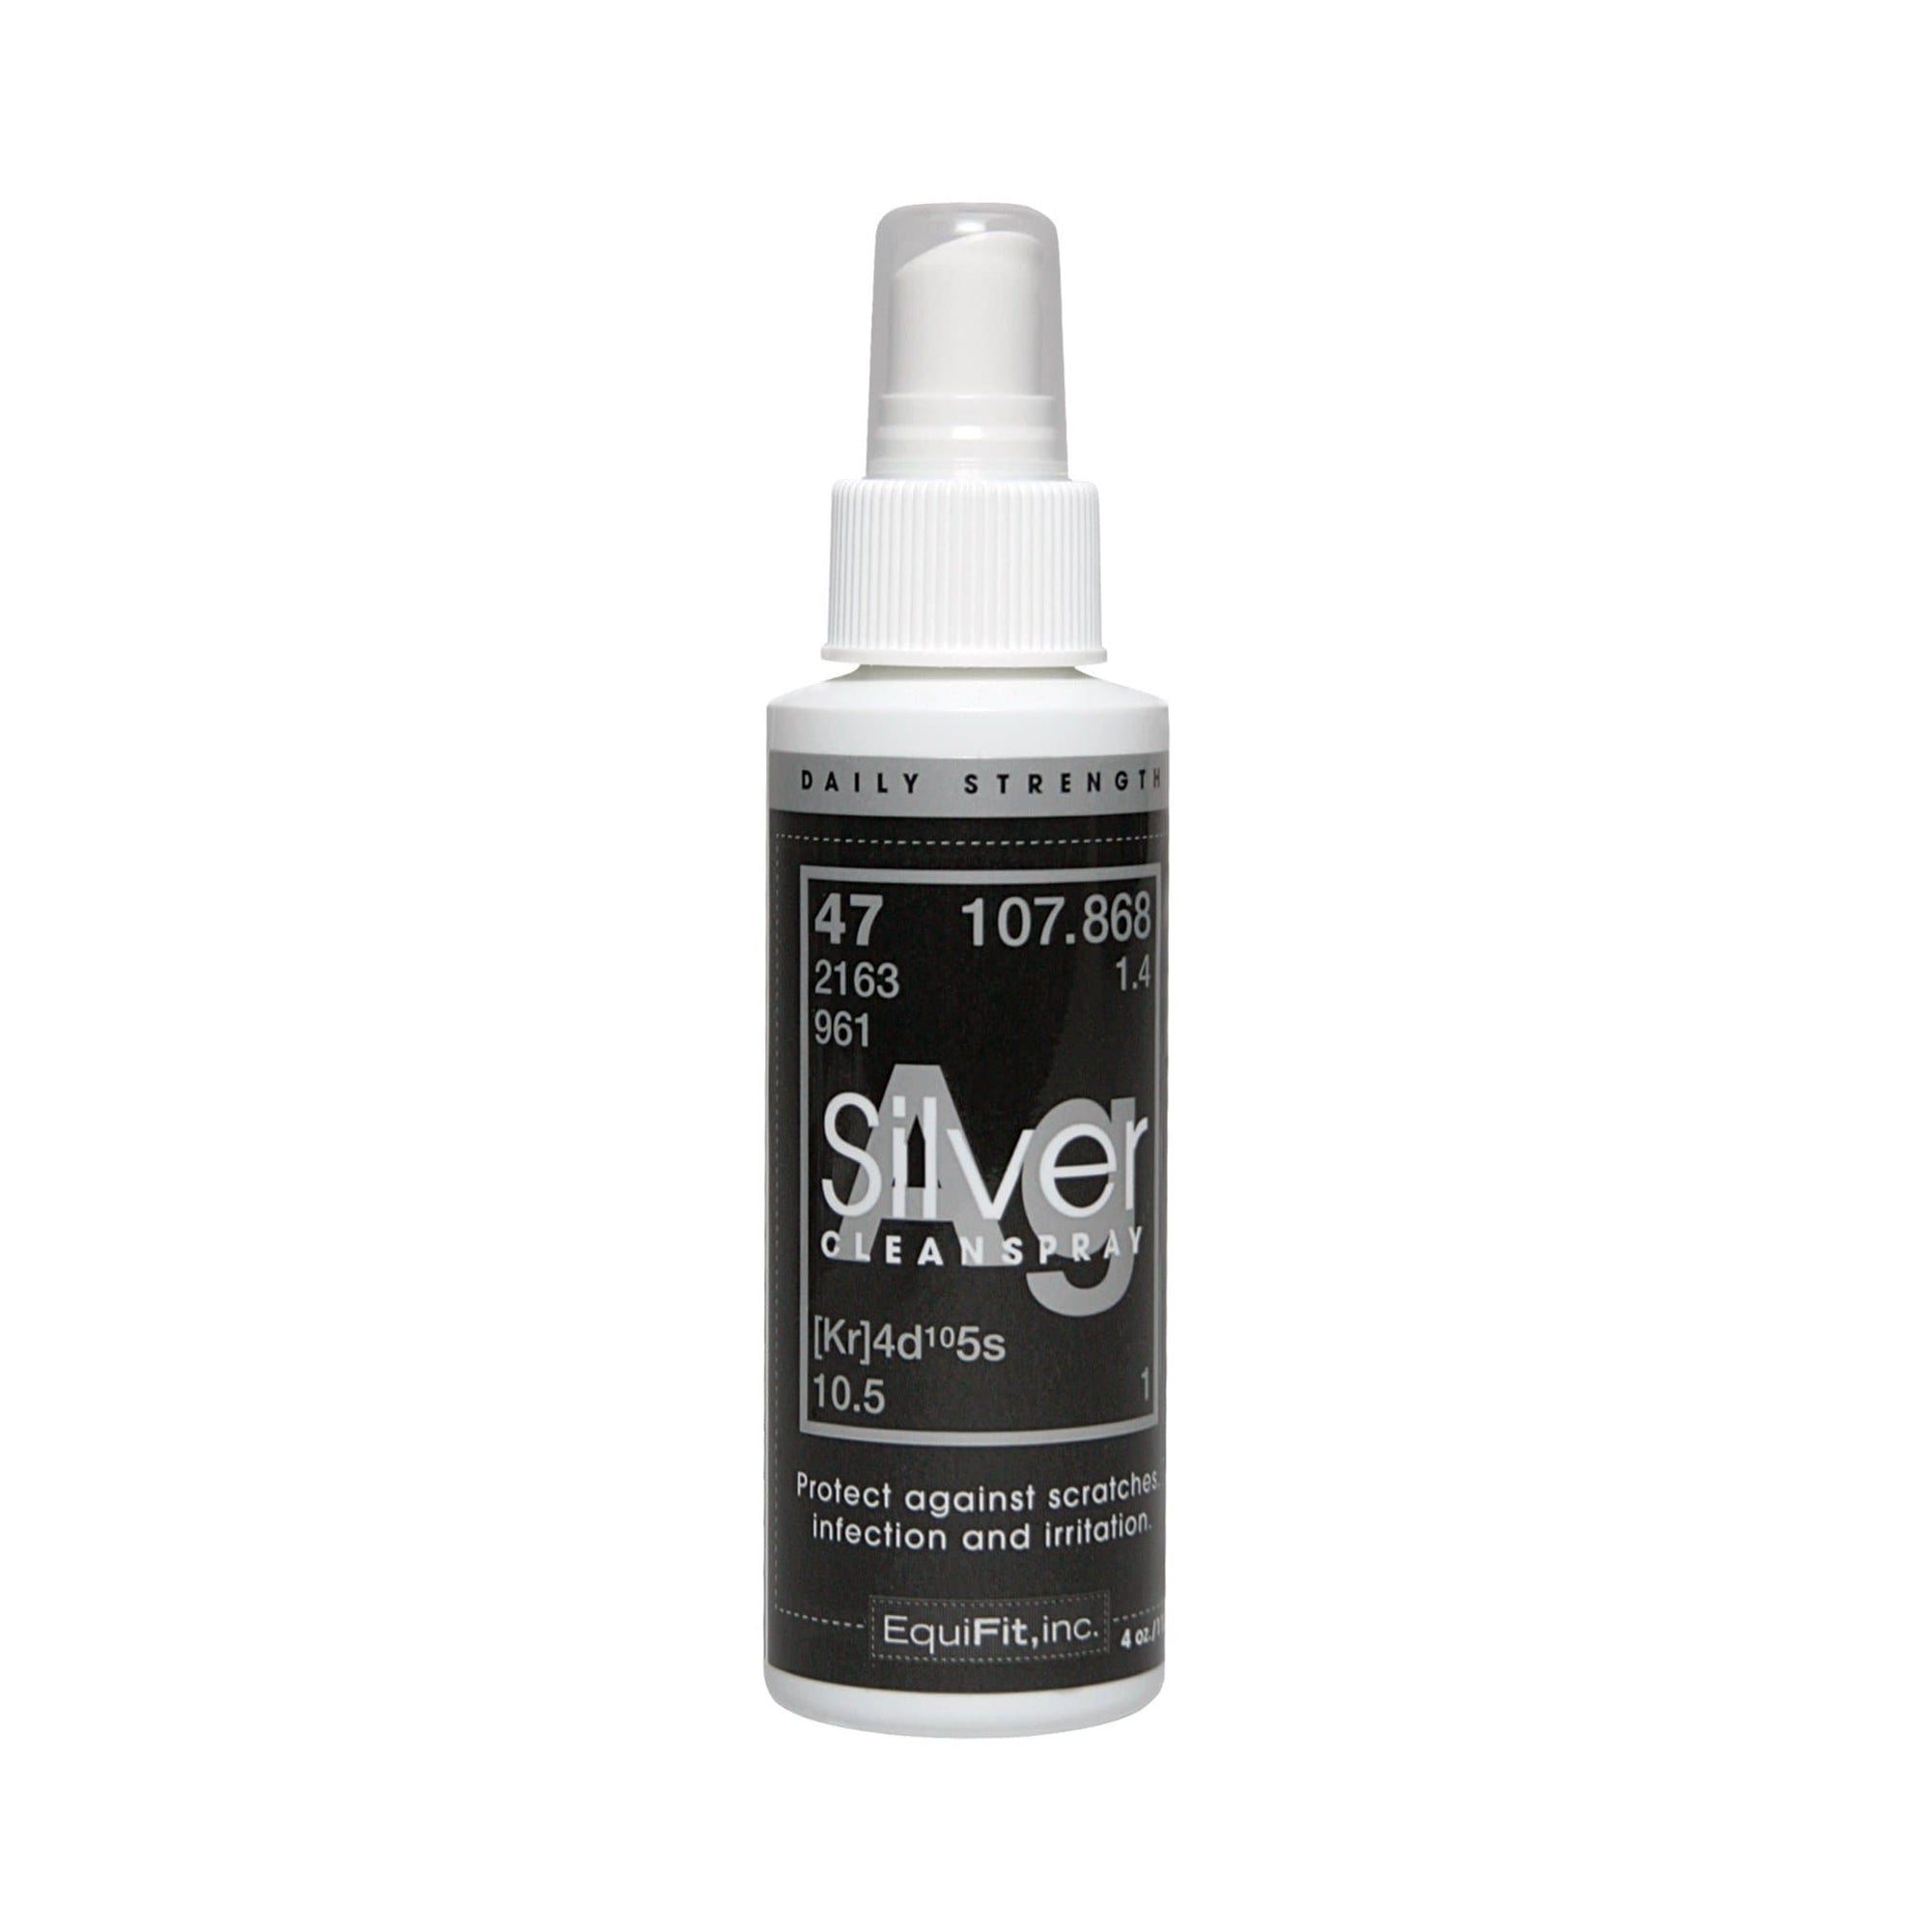 AgSilver Daily Strength CleanSpray is made from Ionic Silver, a smart element that naturally releases antimicrobial properties to keep bacteria, mold and fungus at bay. 